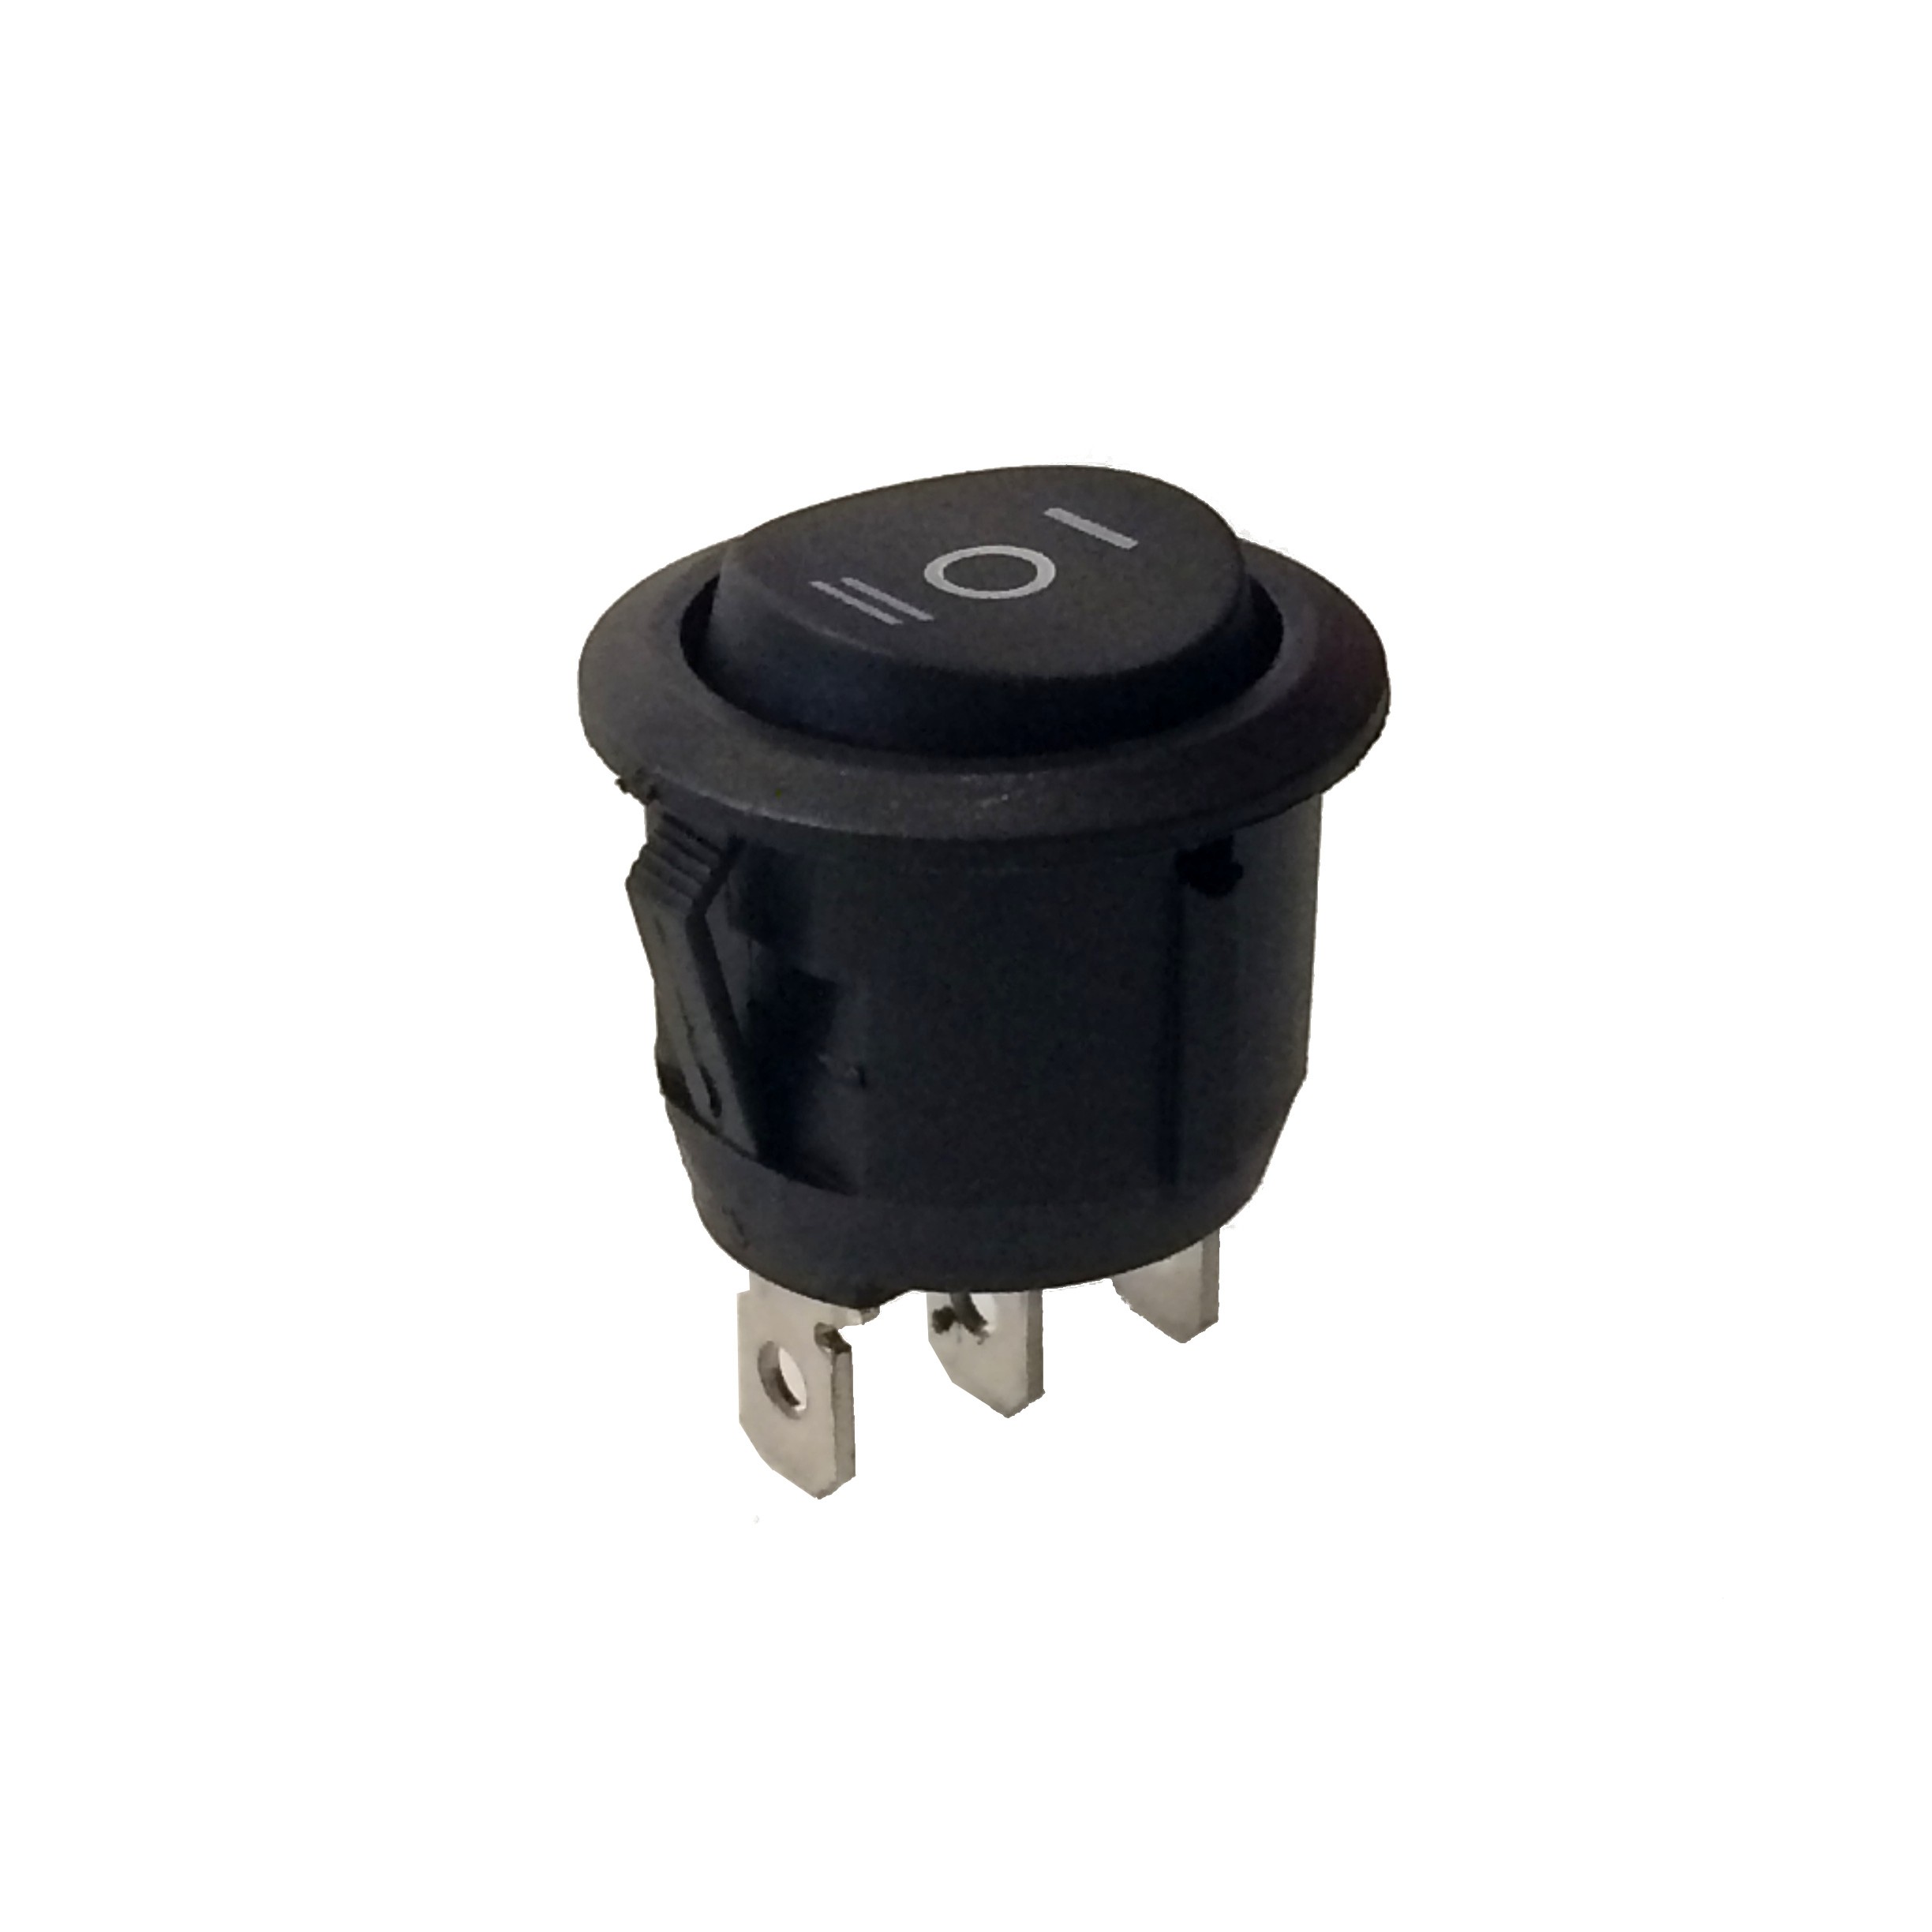 4PcsR13-402C ON-ON 3Pin2Position Maintained Round Toggle Switch SPDT Panel Mount 799123066450